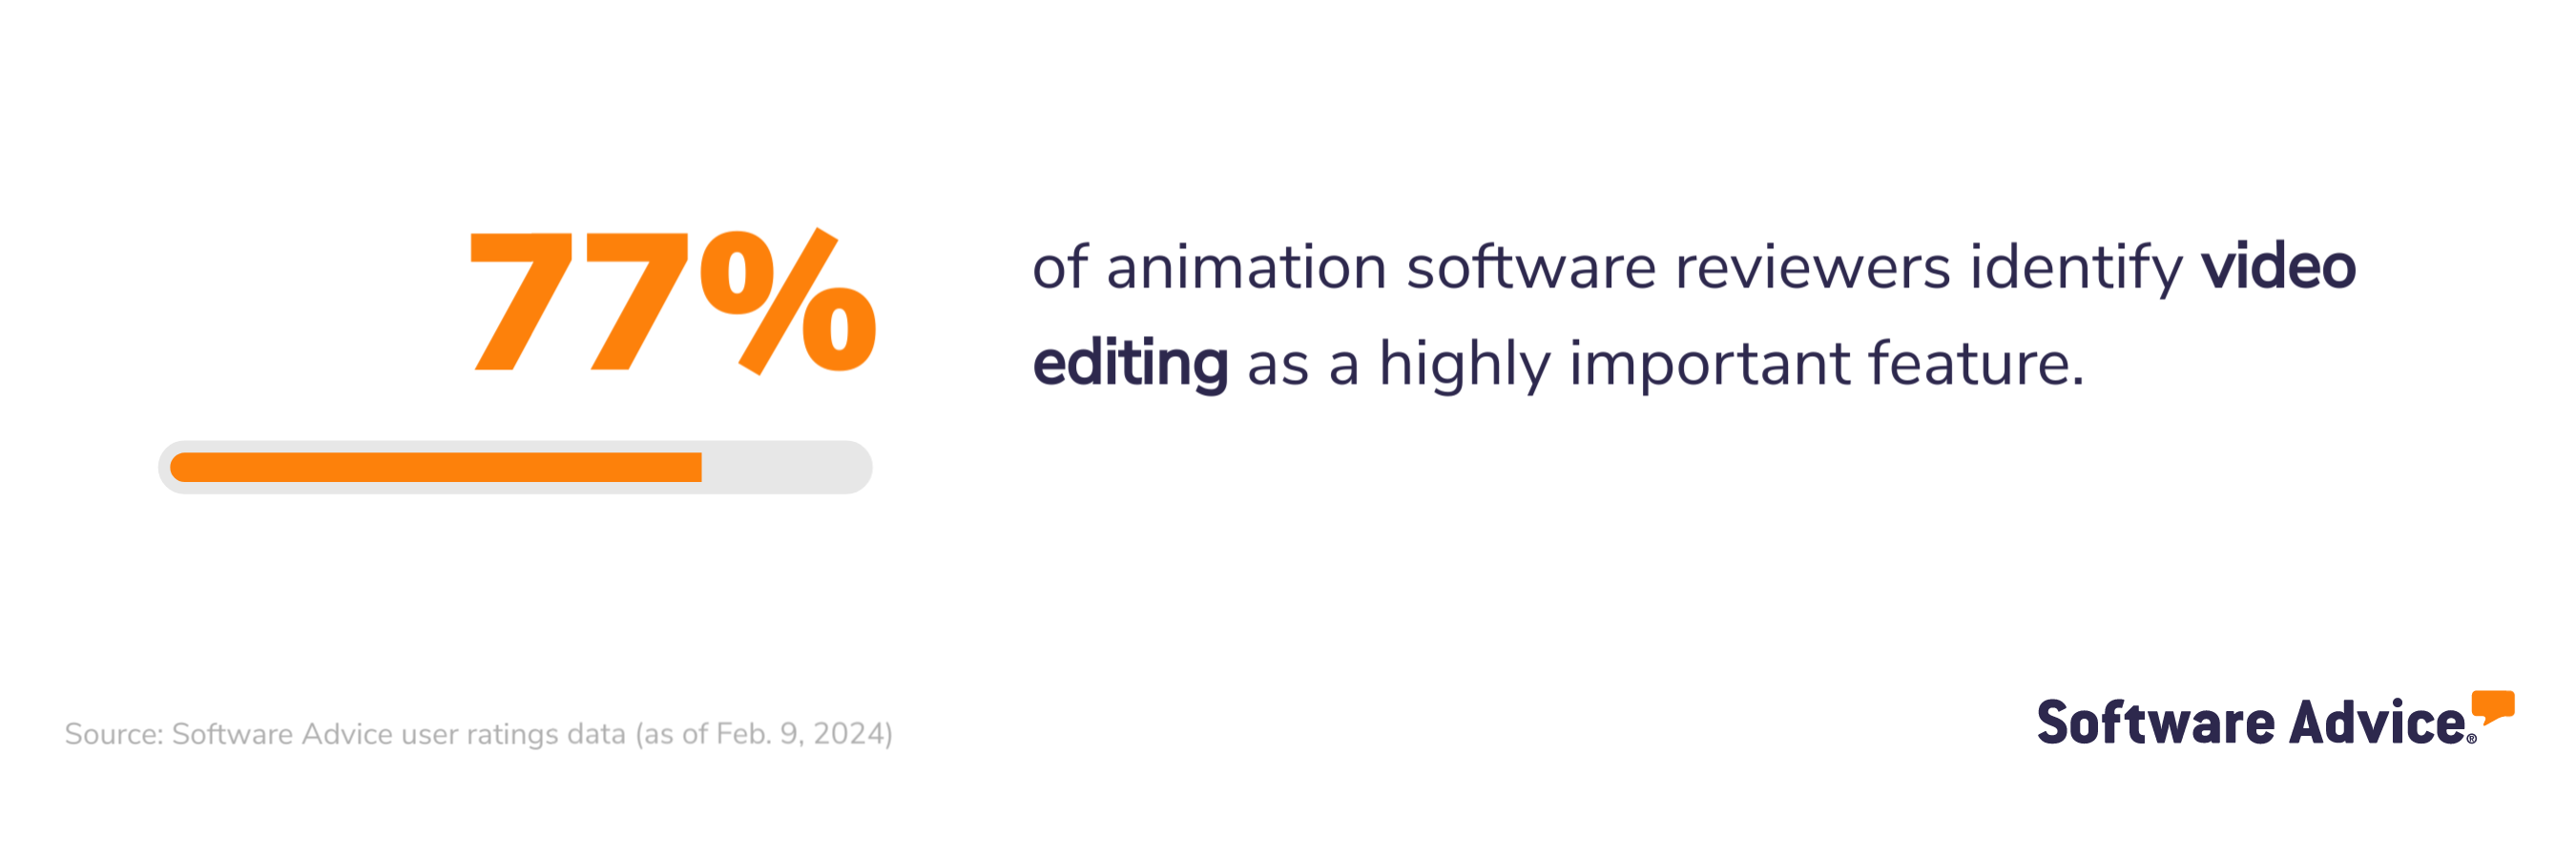 77% of animation software reviewers identify video editing as a highly important feature